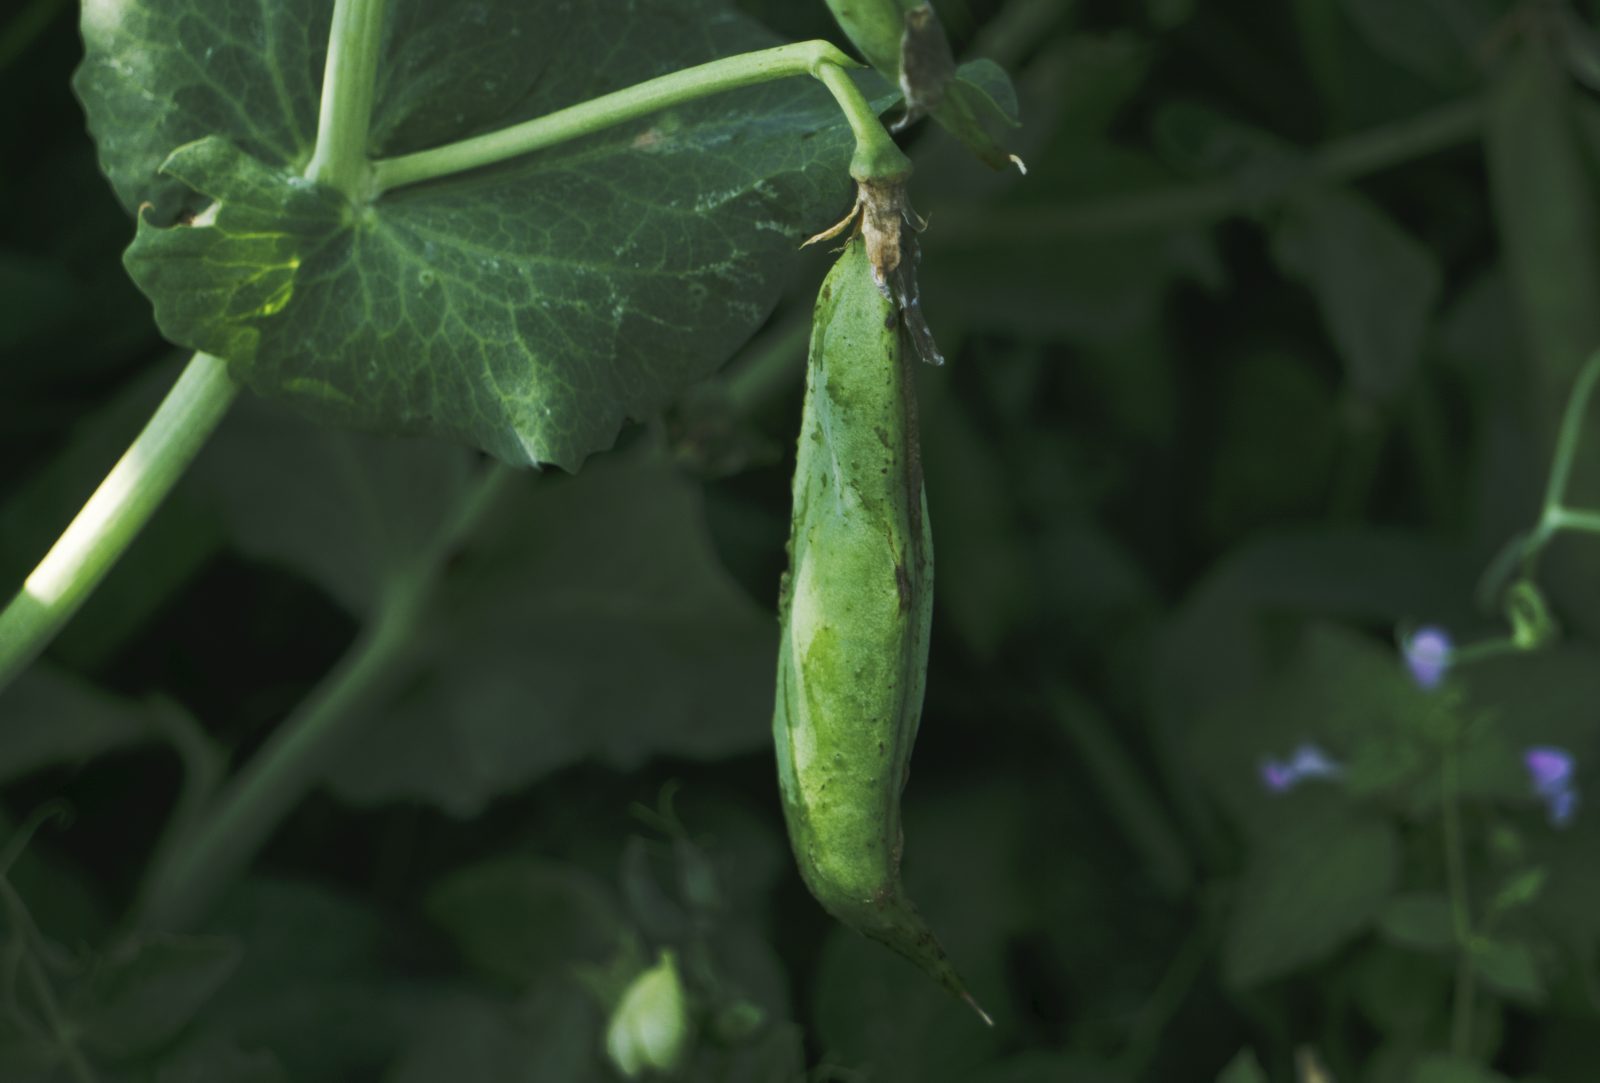 Photo of a fresh bright green pea pod on a pea plant in a garden. Growing peas outdoors.